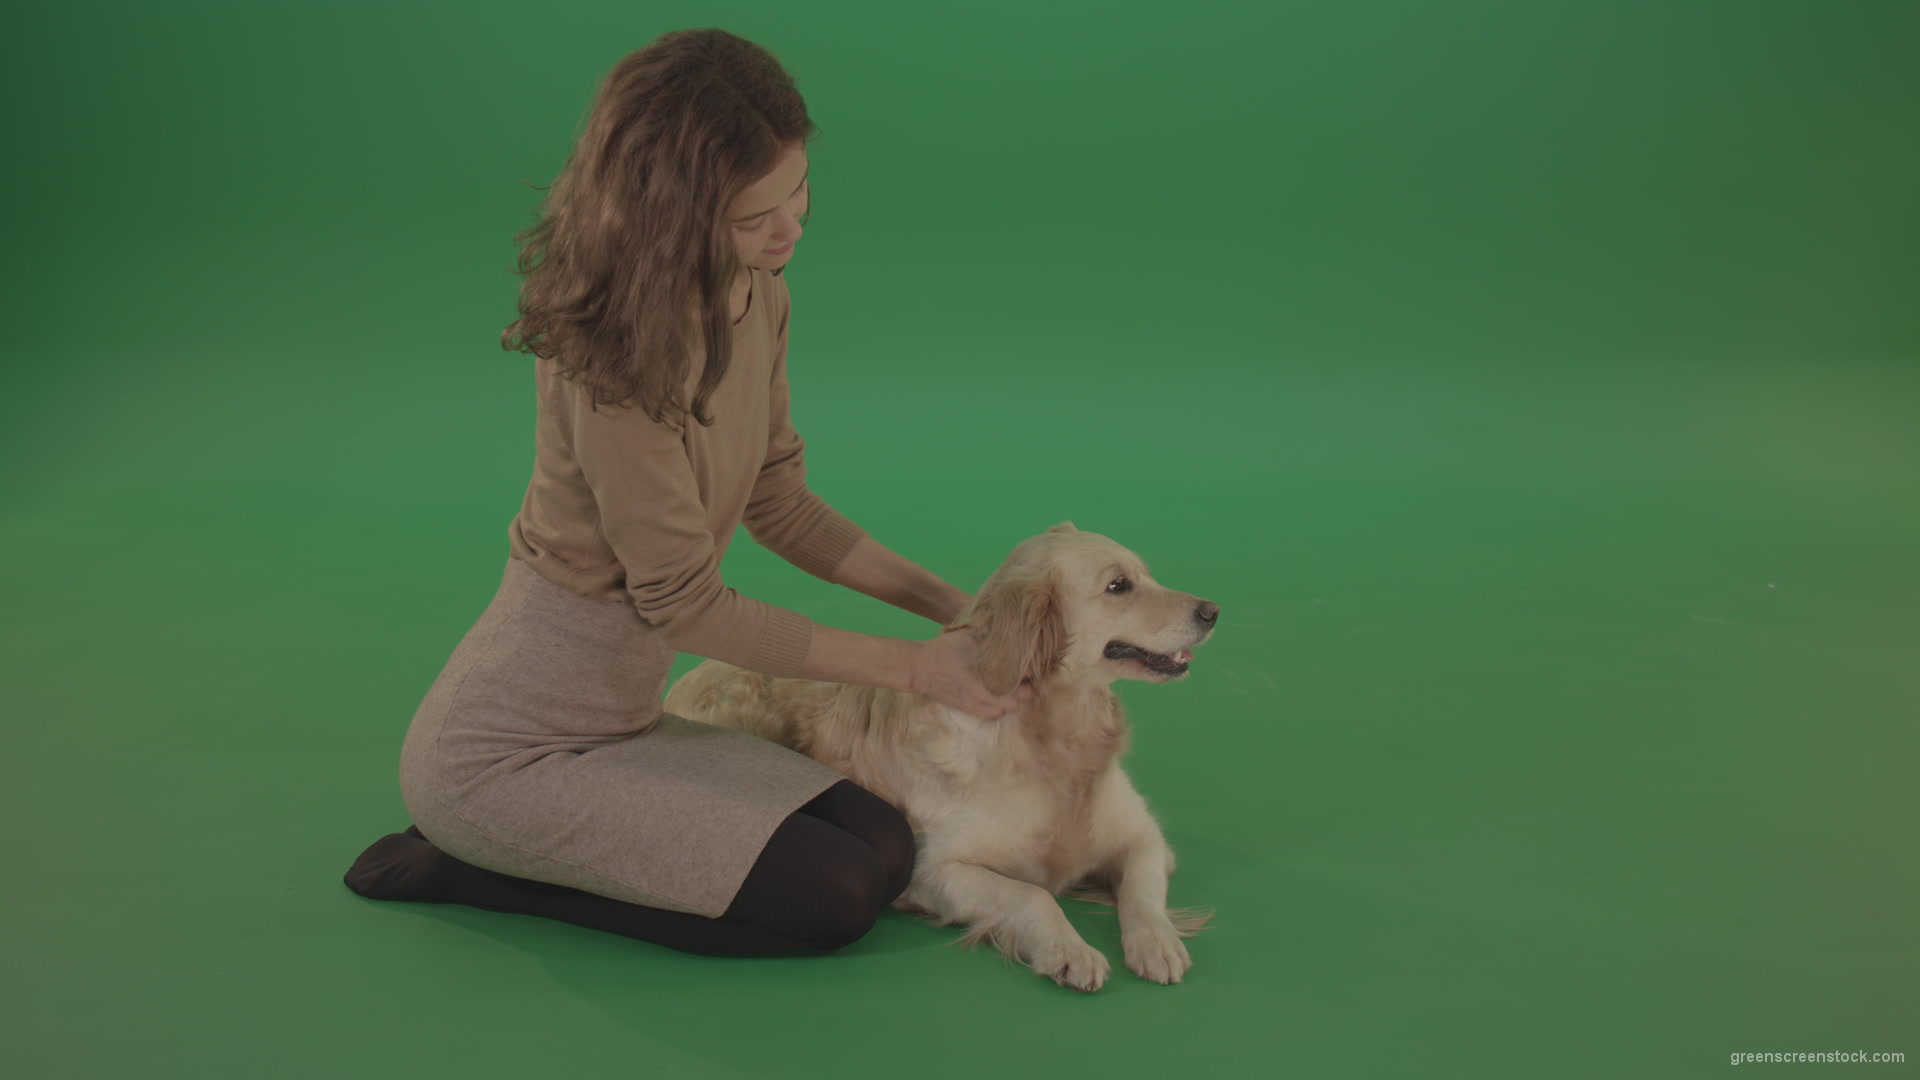 Young-Girl-stroke-the-dog-golden-retriever-big-puppy-isolated-on-green-screen-background_008 Green Screen Stock